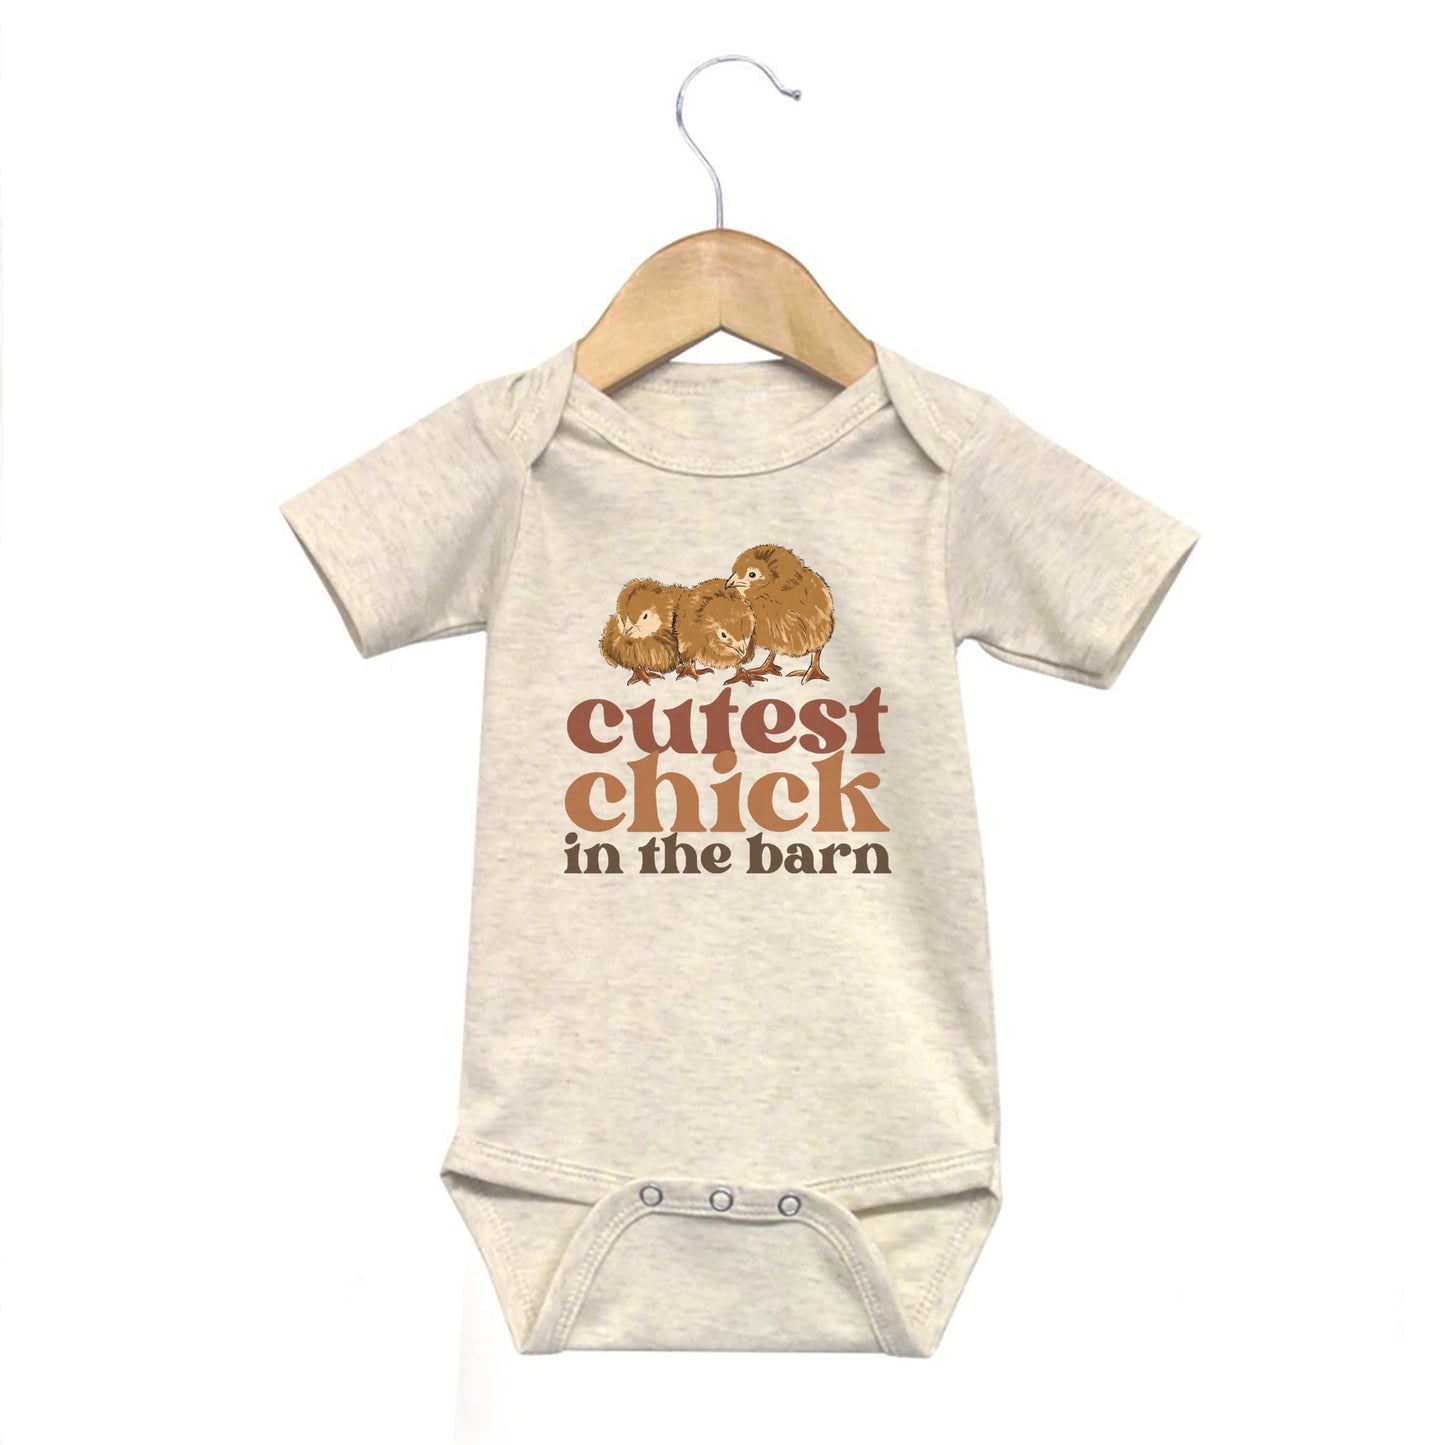 "Cutest Chick in the barn" Baby Girl Beige Chicken Body Suit